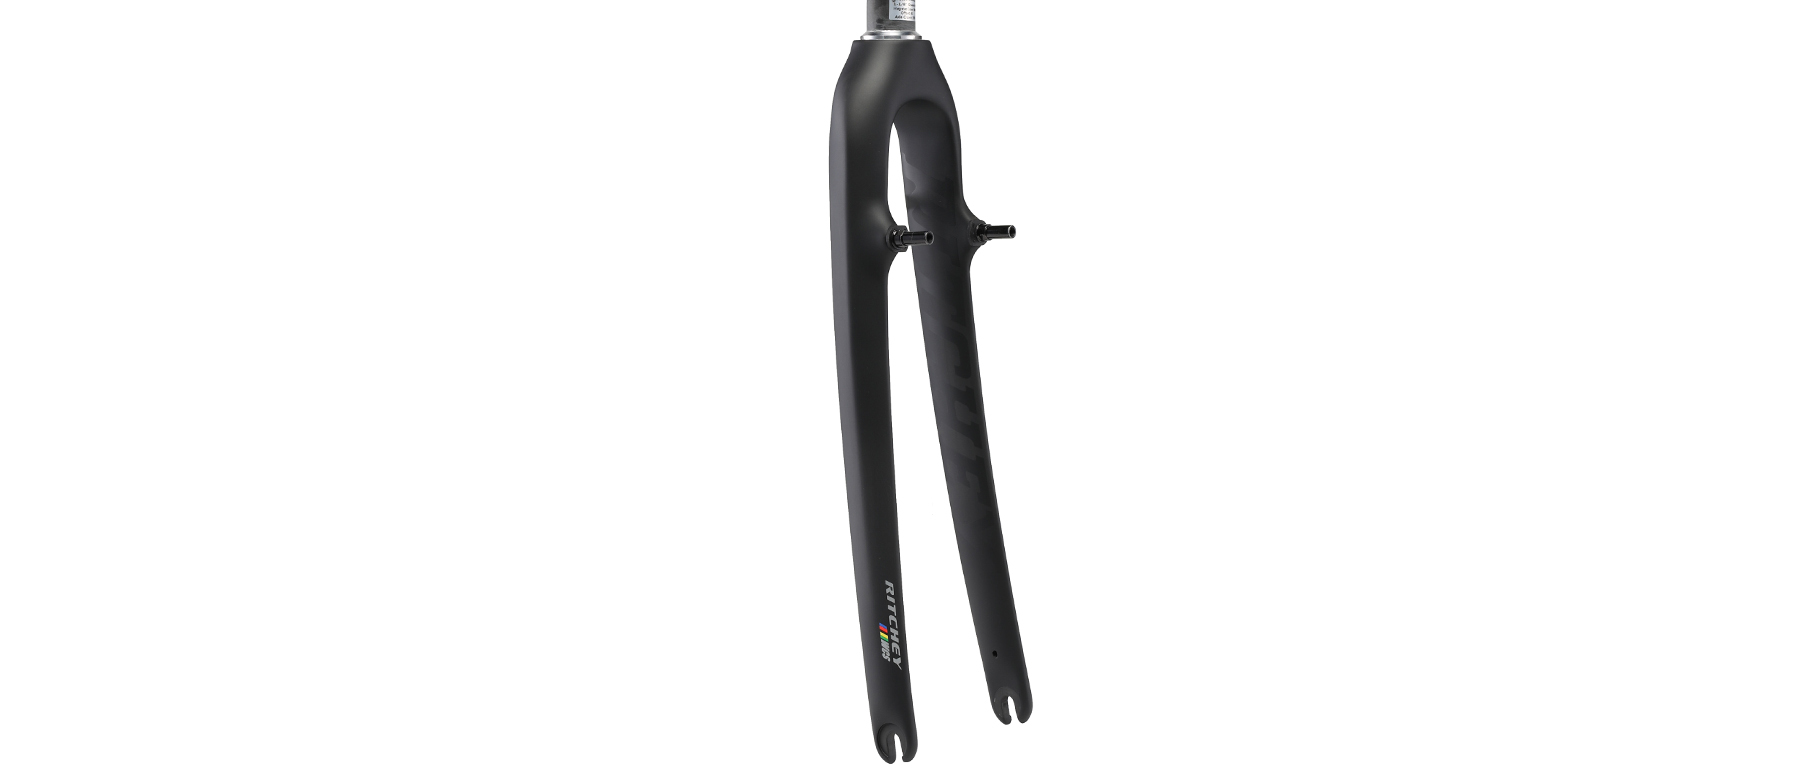 Ritchey WCS Carbon Cross Cantilever Fork Excel Sports | Shop